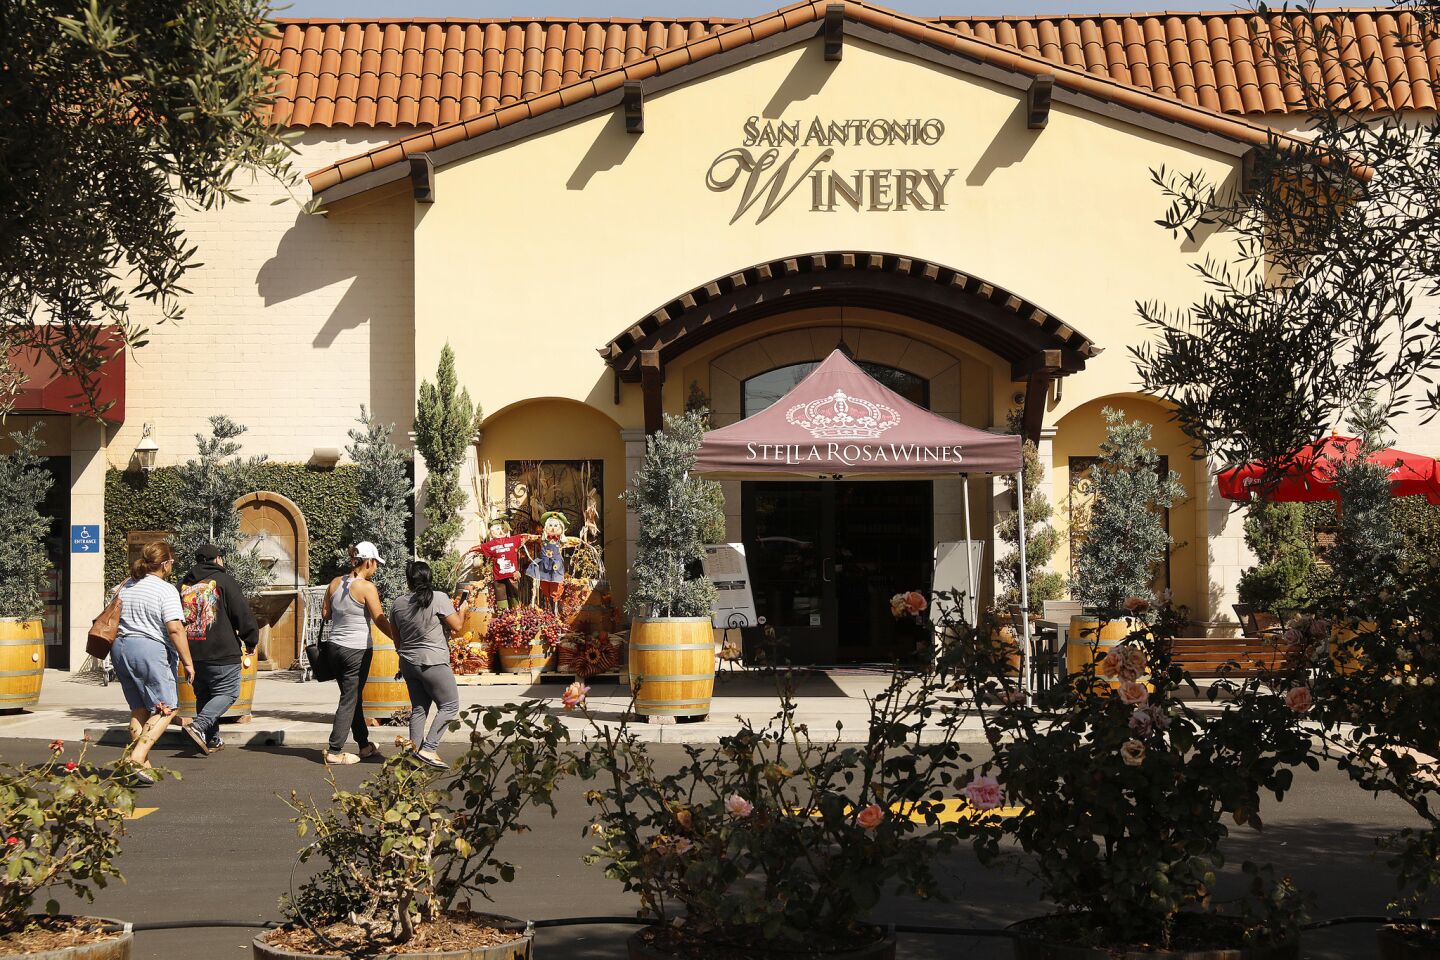 The entrance to the historic San Antonio Winery in Lincoln Heights near downtown Los Angeles.